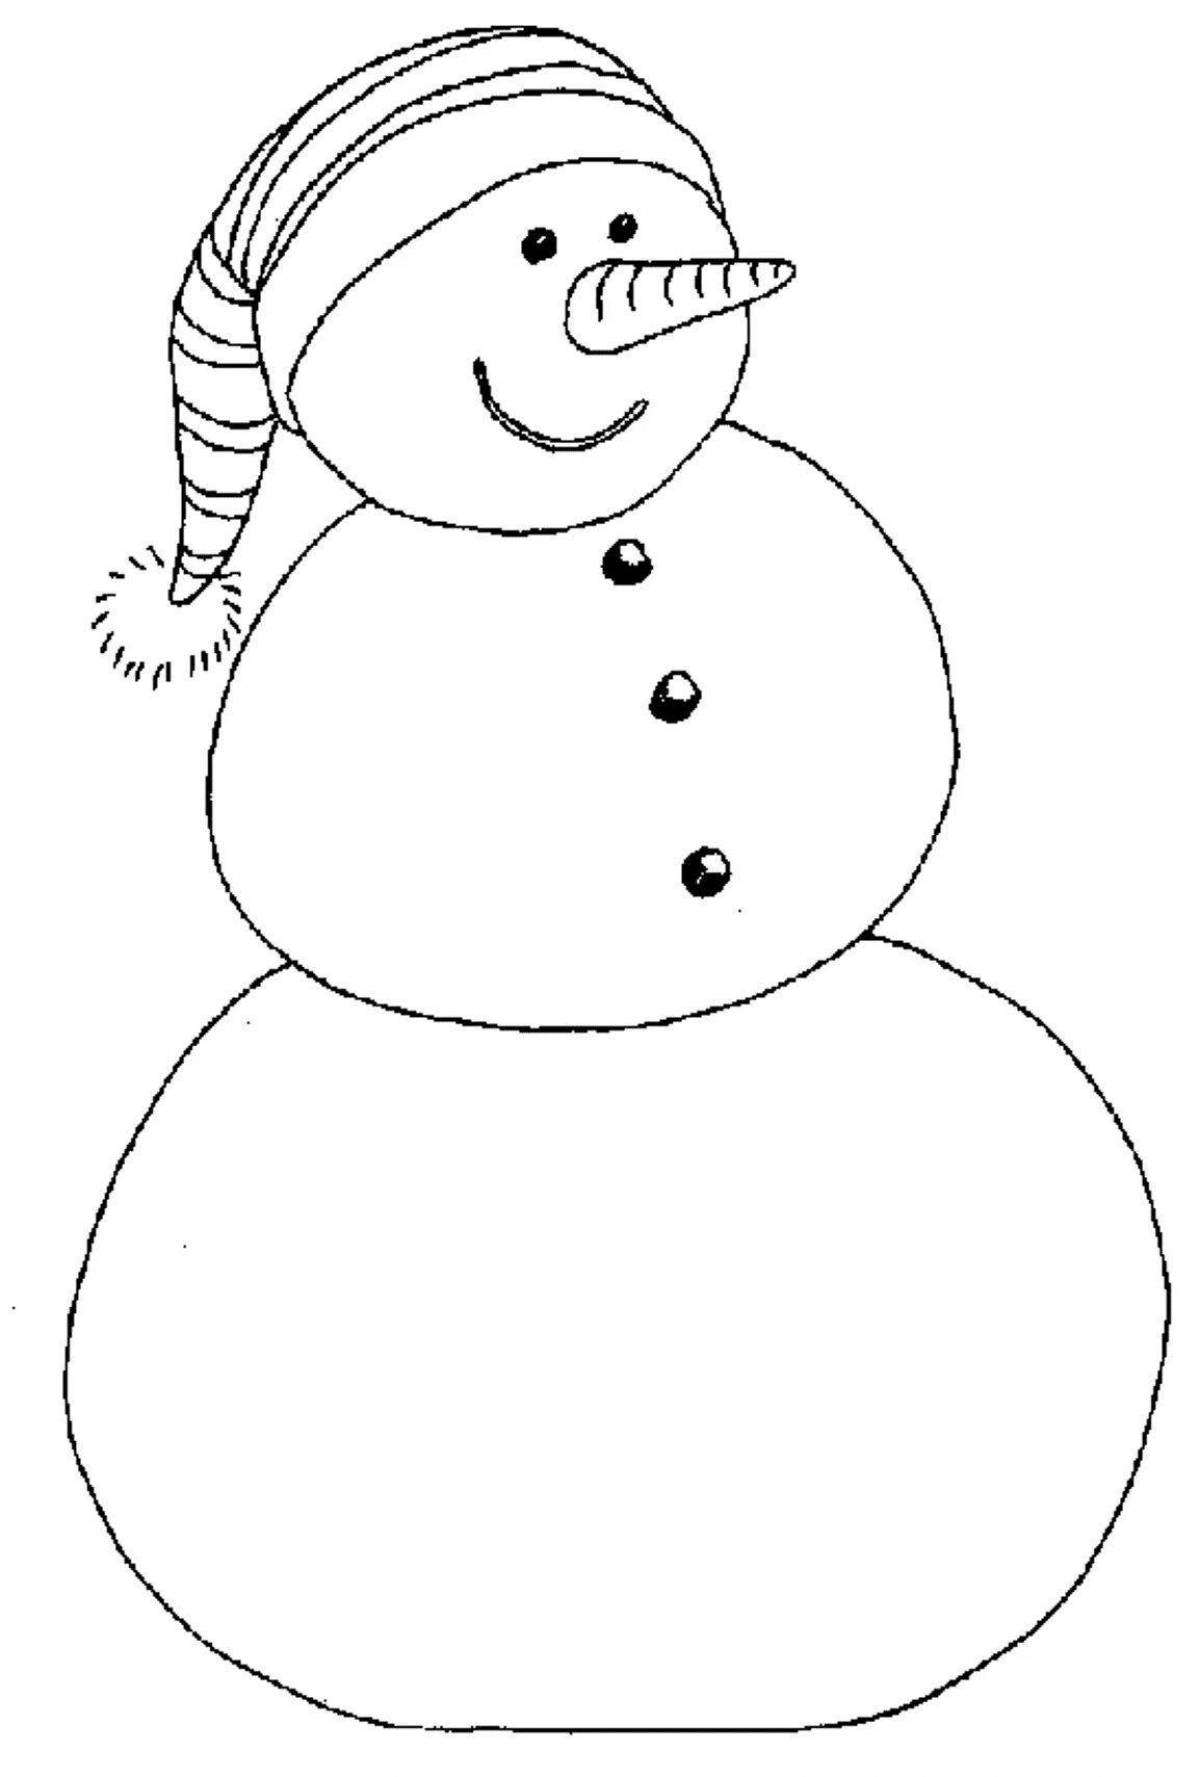 Joyful snowman coloring for children 2-3 years old